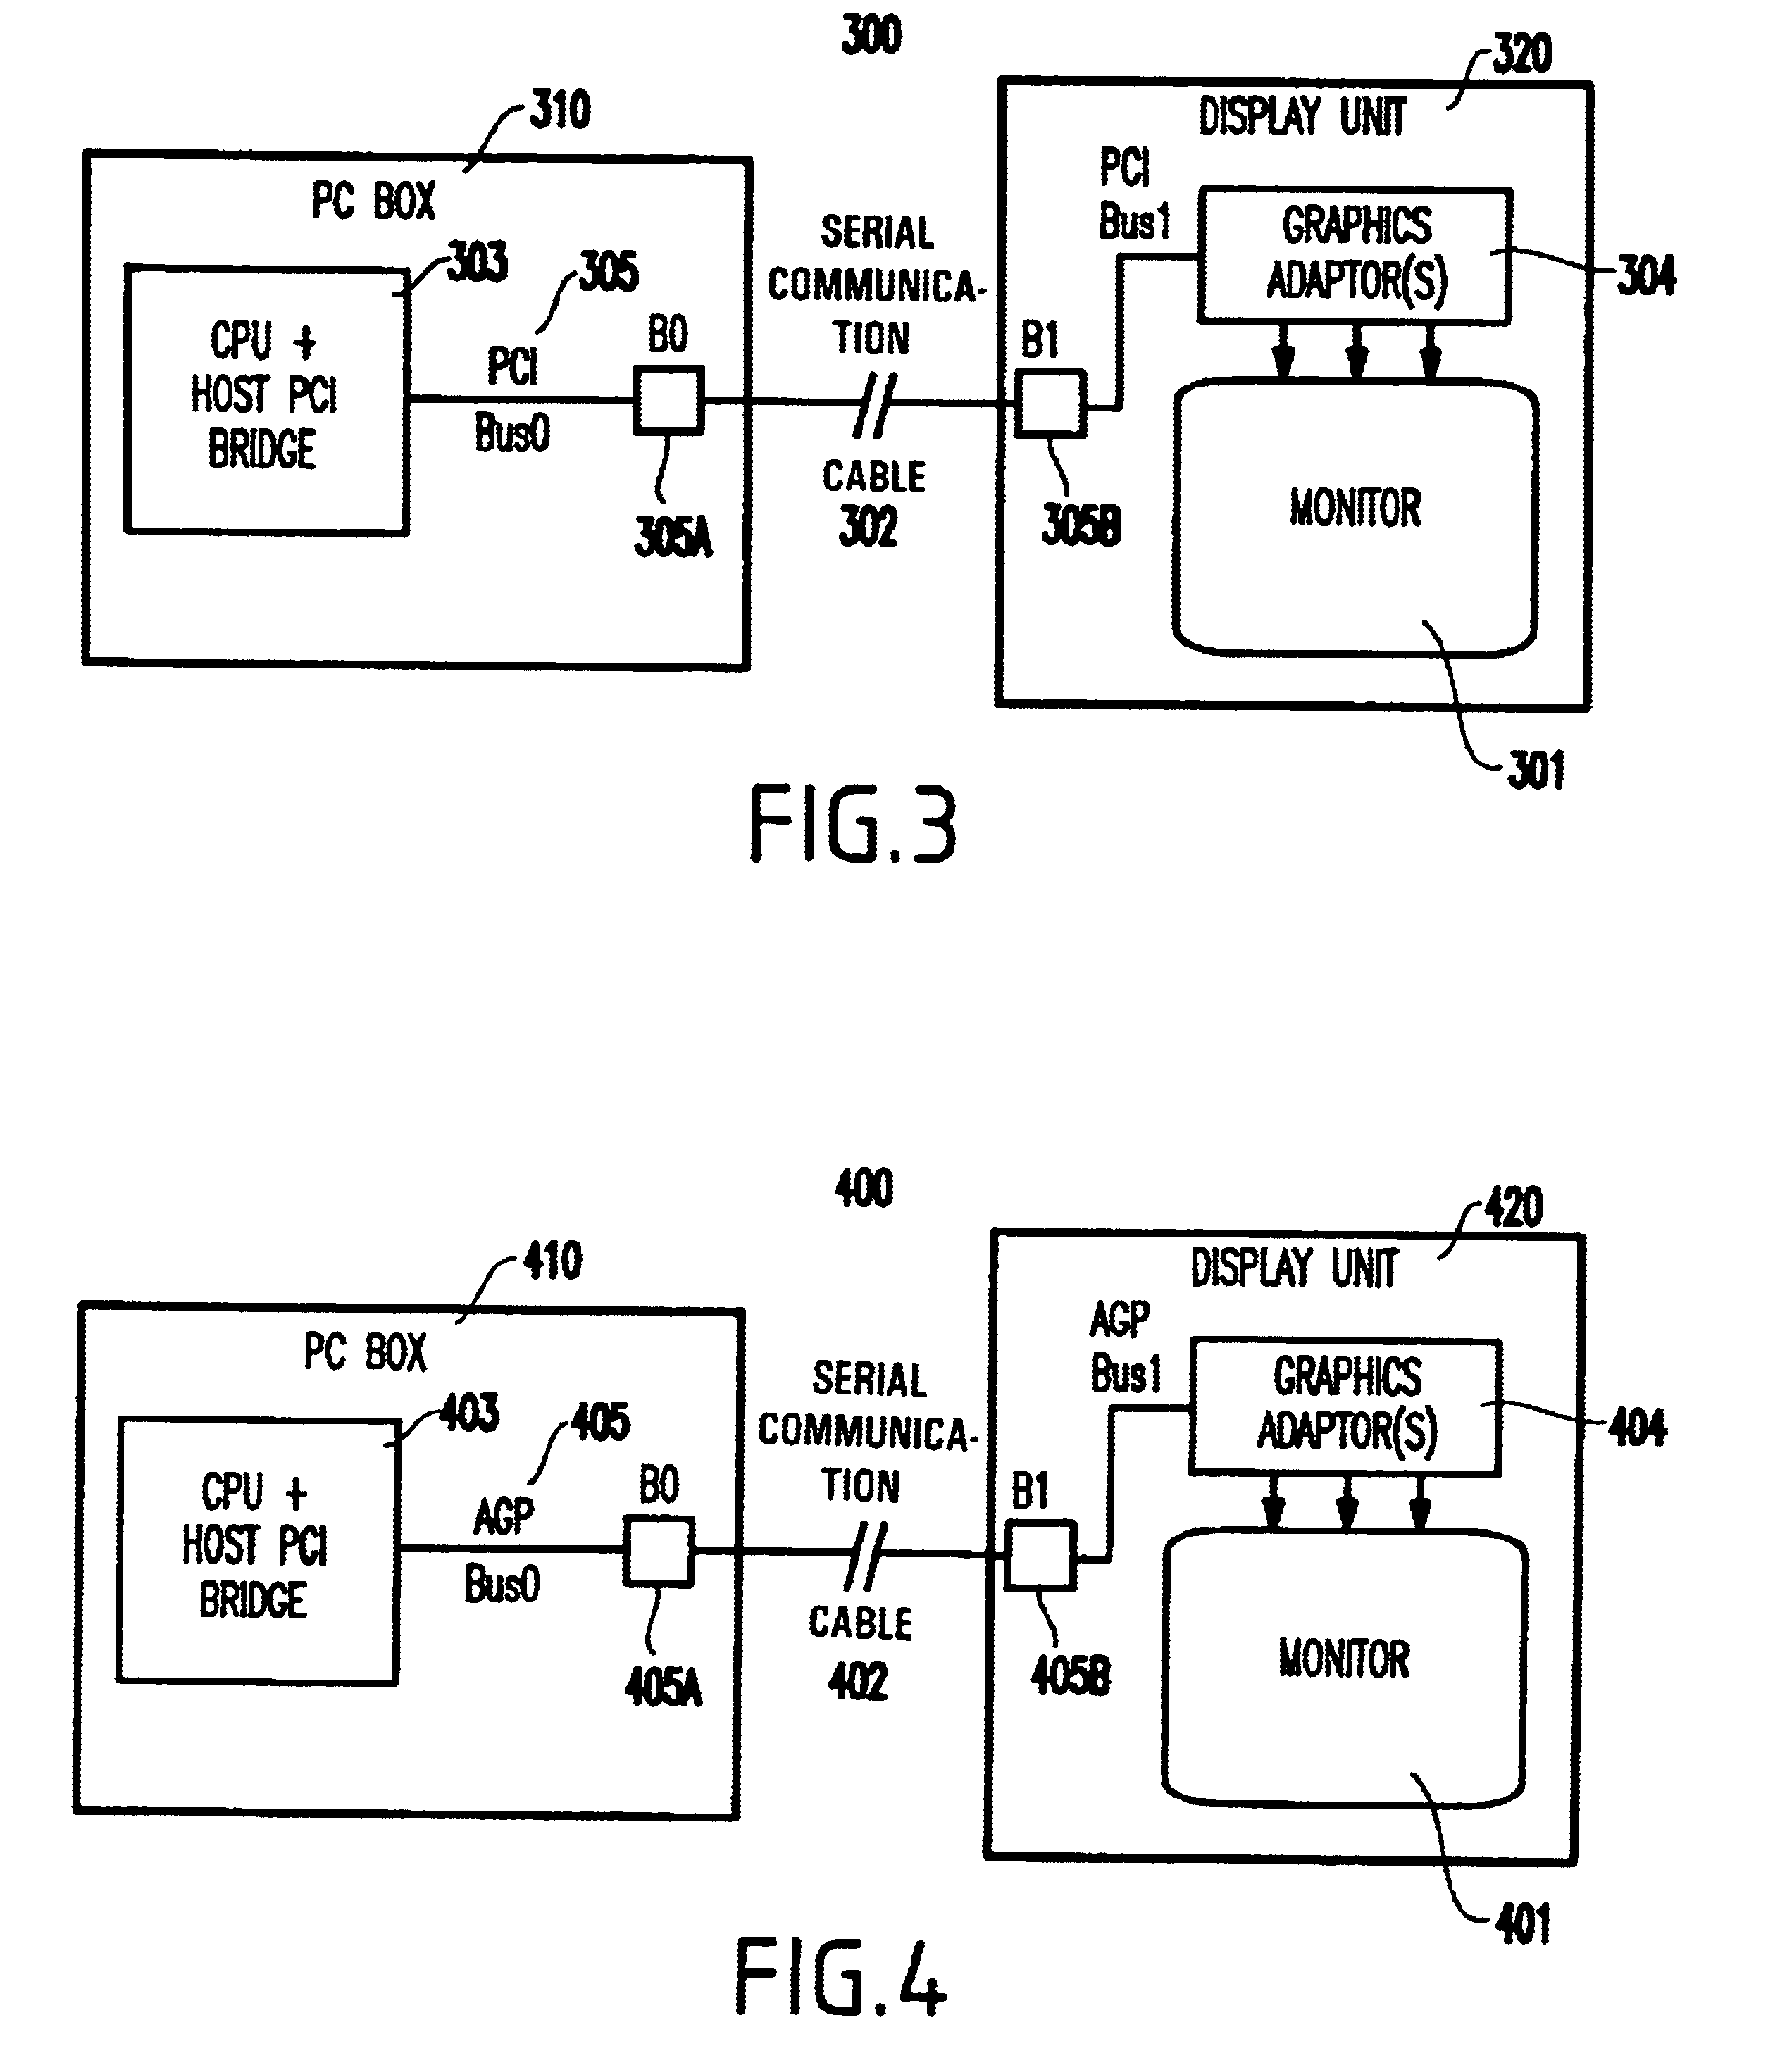 Method and system for high resolution display connect through extended bridge